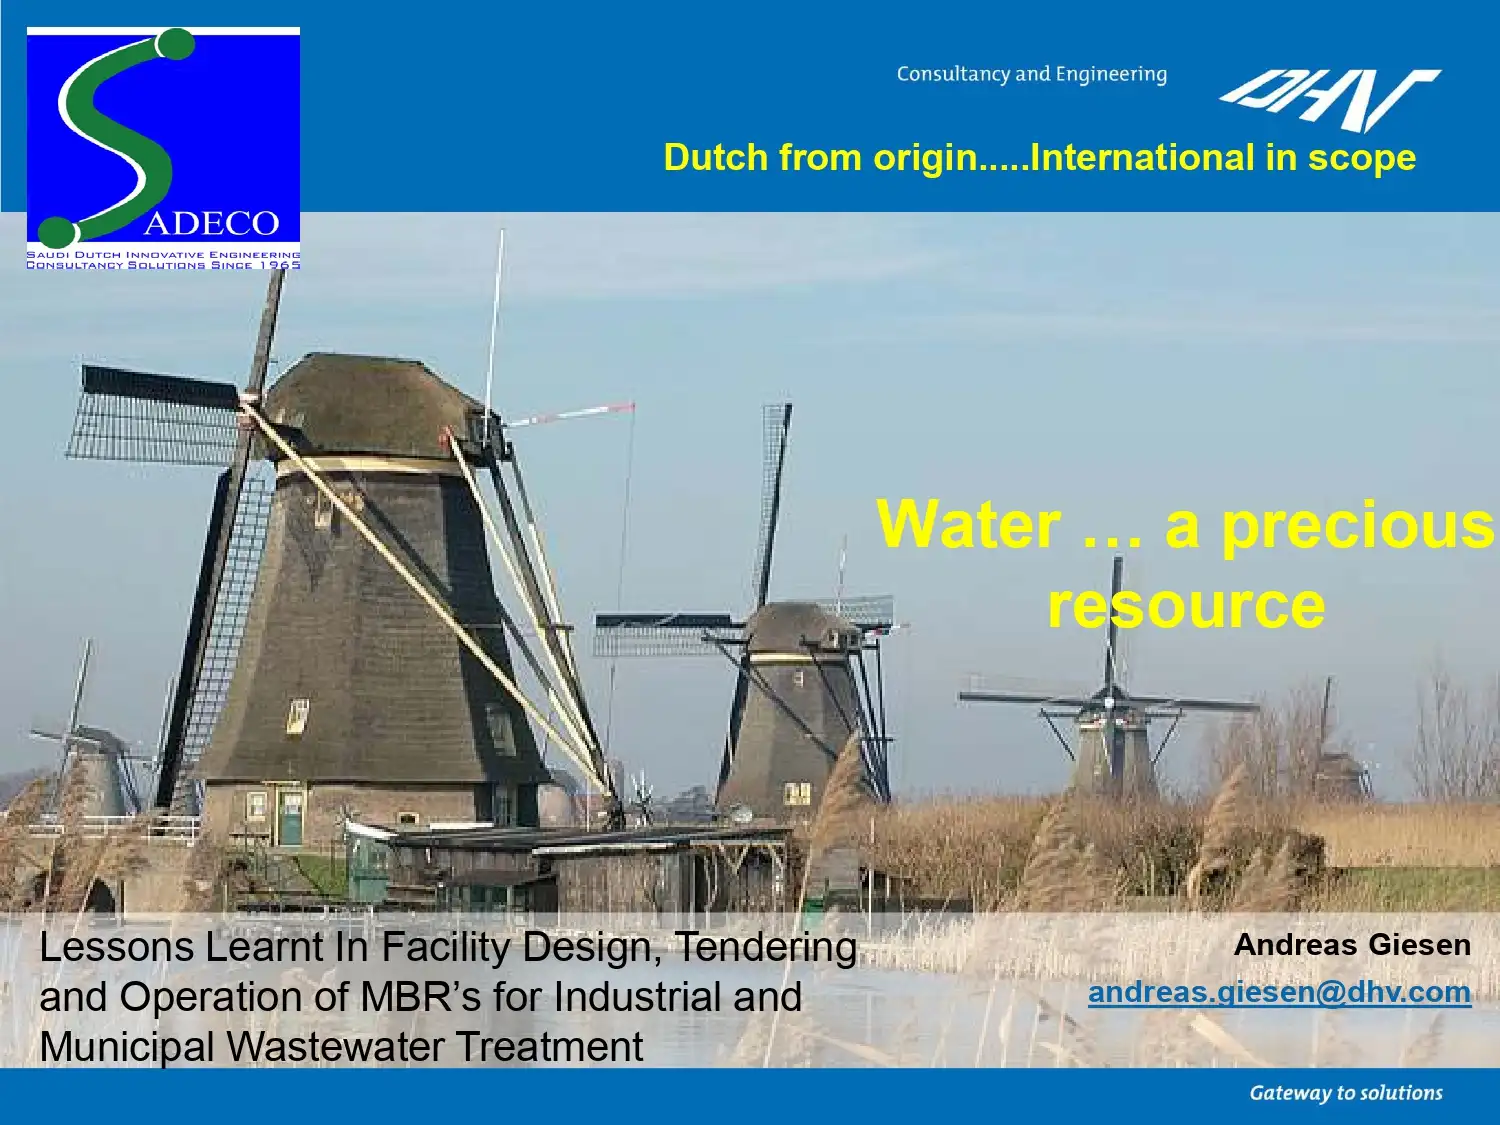 Lessons Learnt In Facility Design, Tendering and Operation of MBR’s for Industrial and Municipal Wastewater Treatment